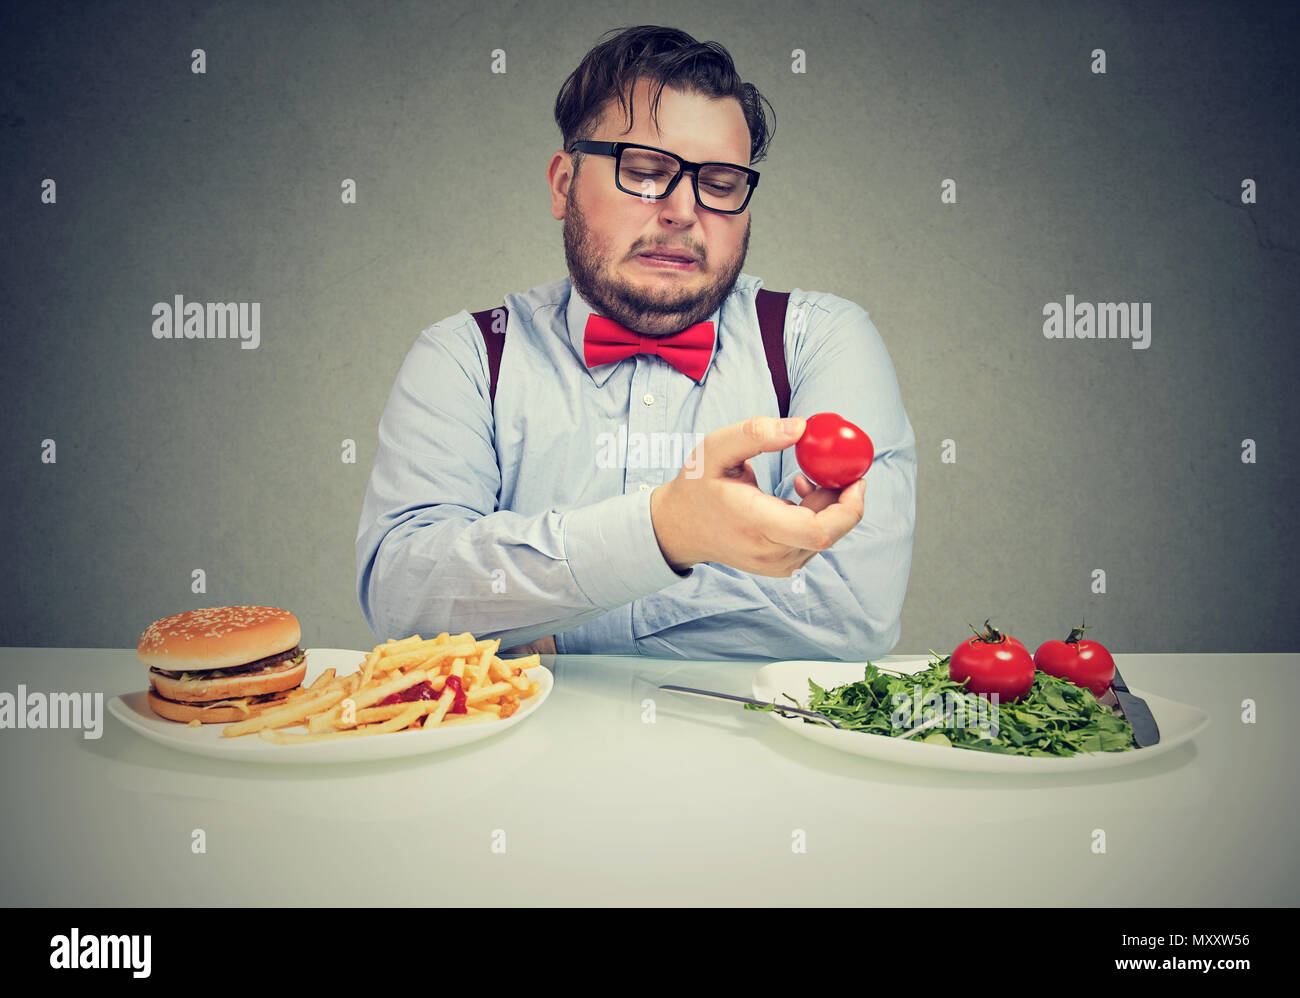 Overweight man in bow tie craving for burger and looking with disgust at salad and tomatoes sitting at table Stock Photo